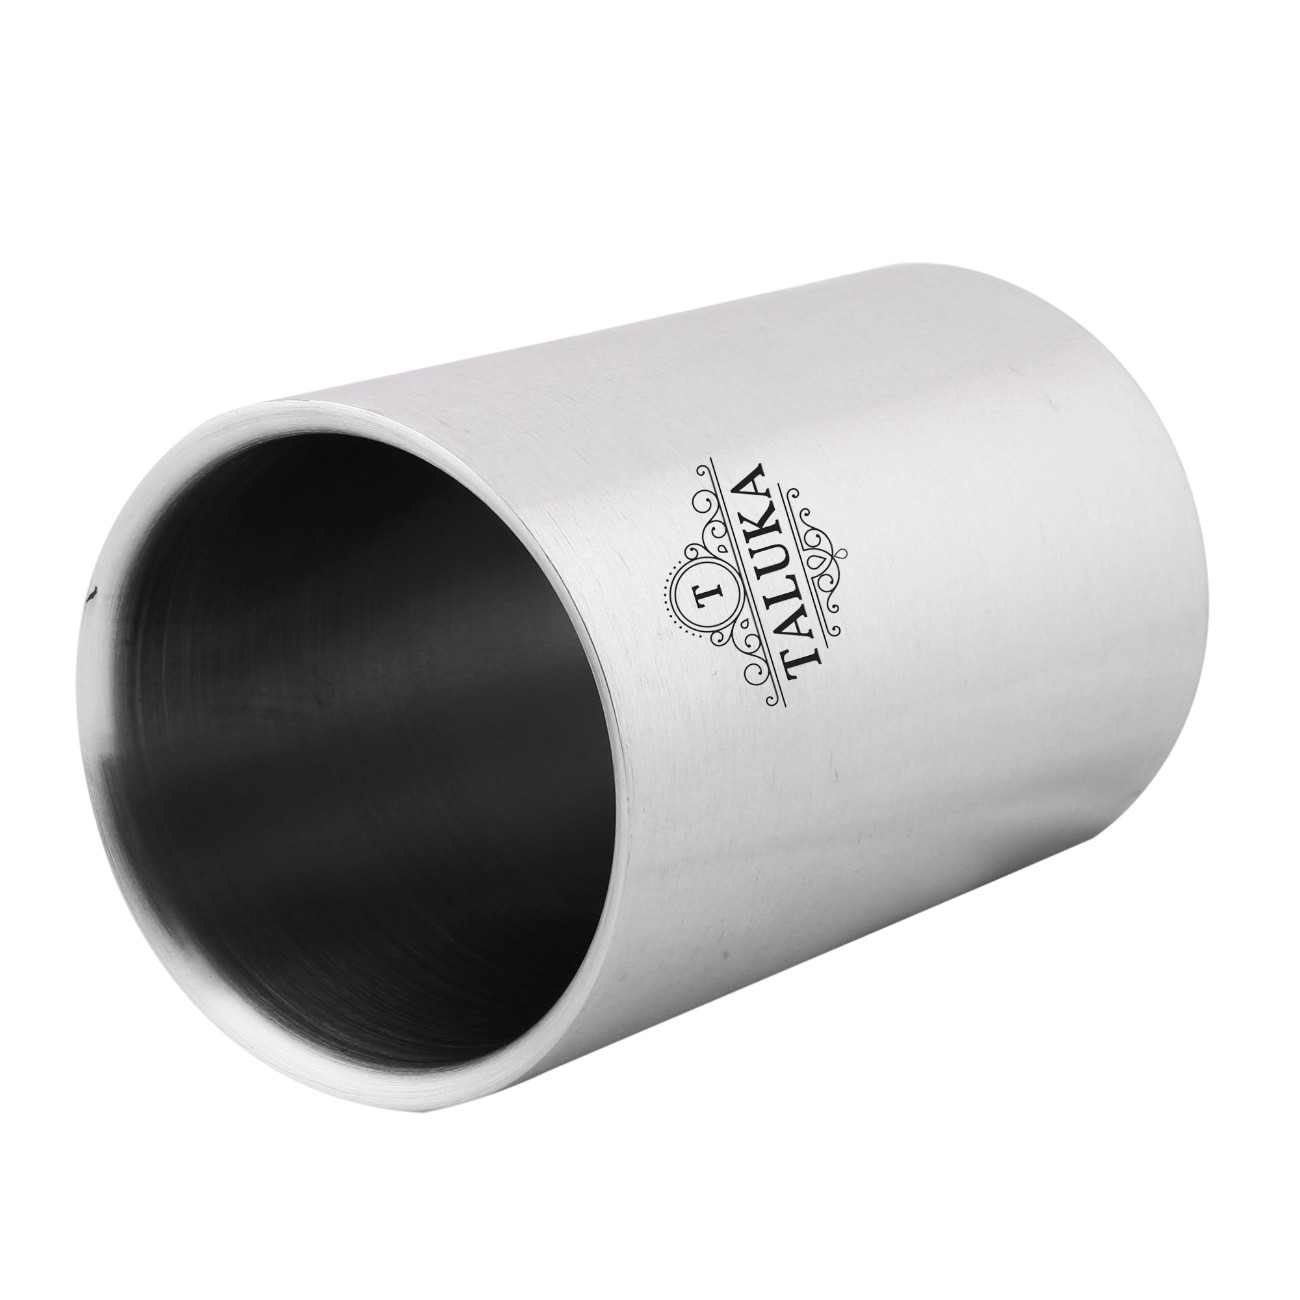 Stainless Steel Plain Round Wine Cooler For Bar Ware Restaurant Home Gift Purpose